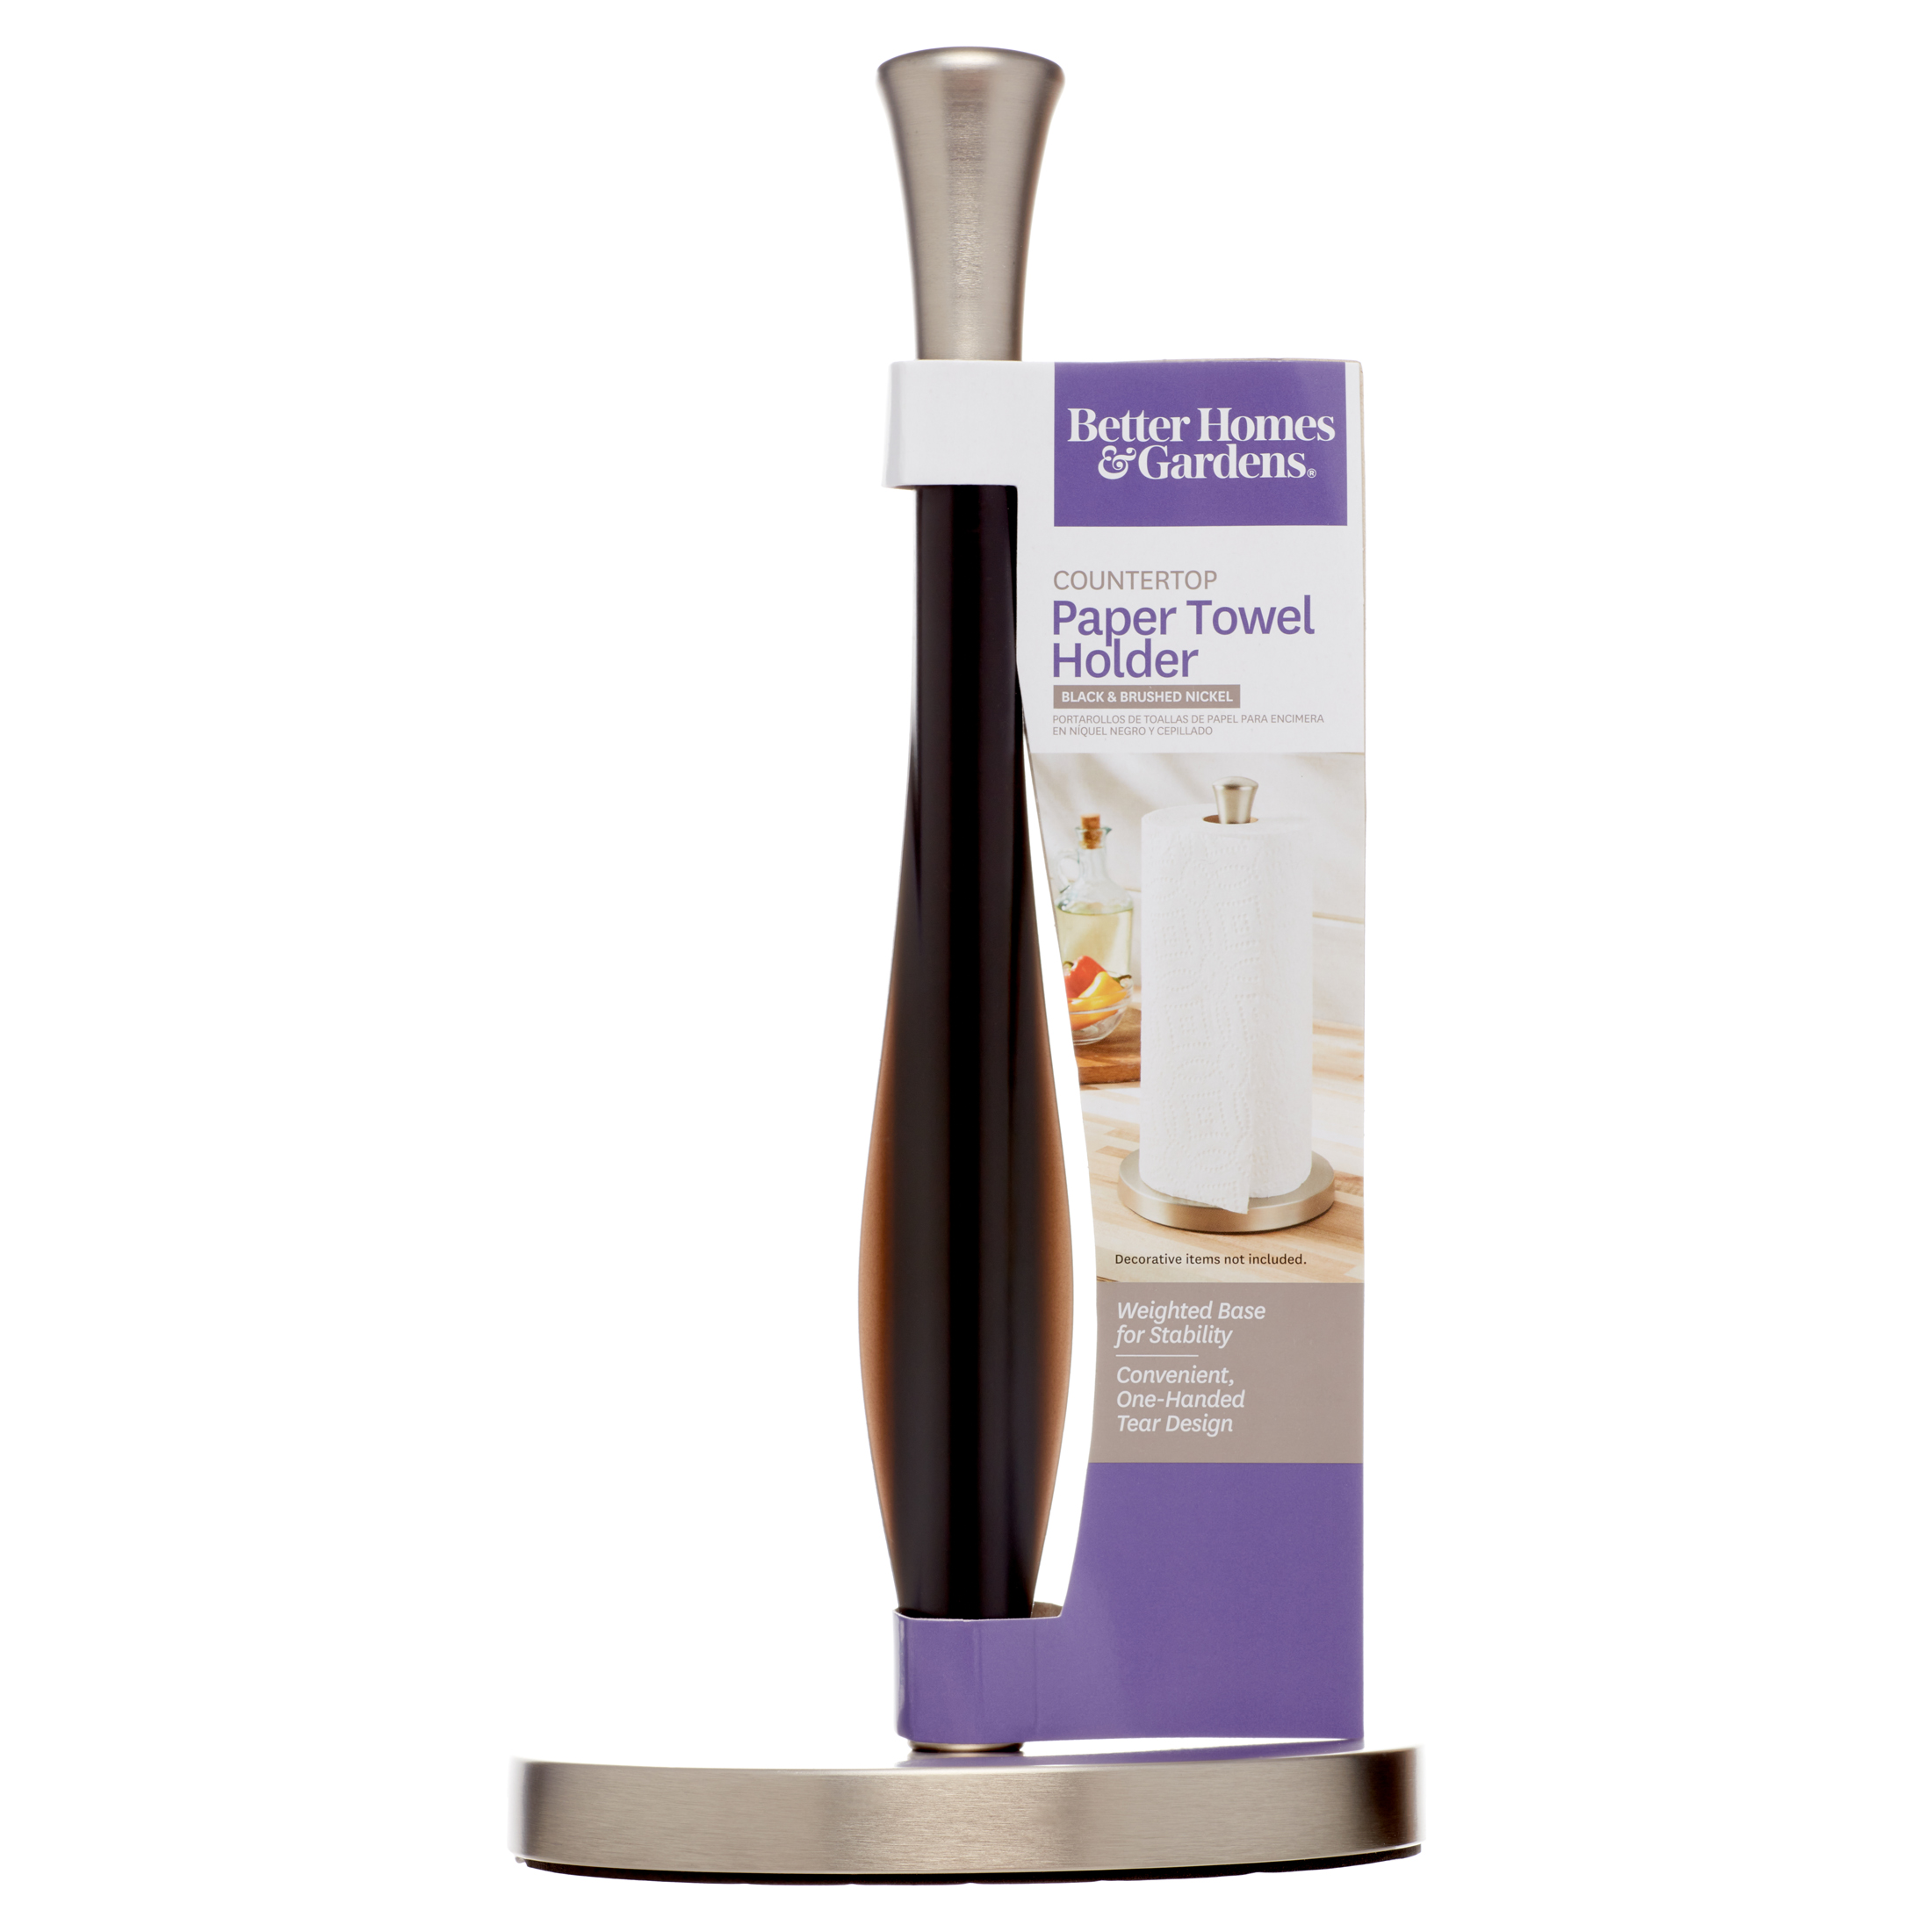 Better Homes & Gardens Free-Standing Paper Towel Holder with Weighted Non-Slip Base, 14 Inch, Nickel - image 5 of 7